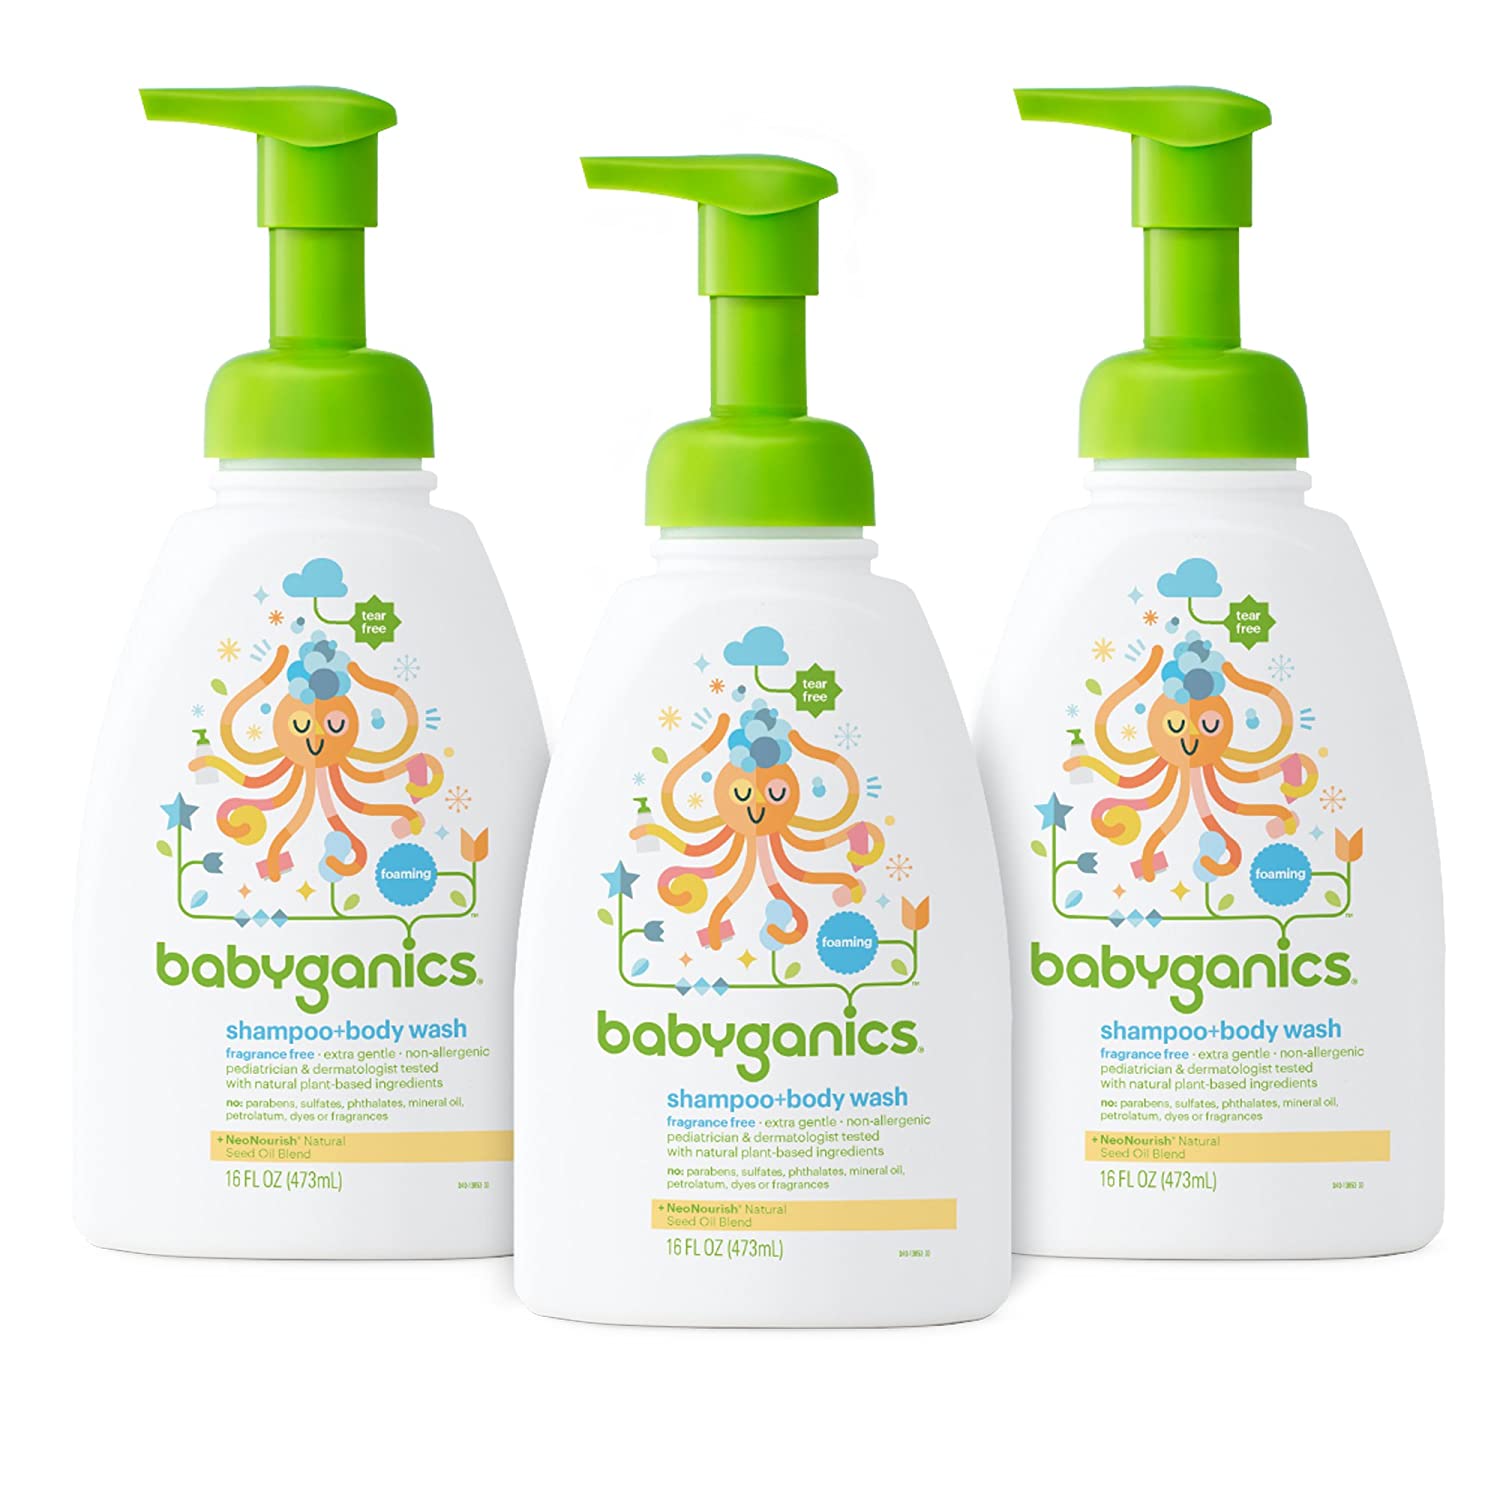 Top 13 Best Organic Baby Washes 2022 - Review & Buying Guide 3